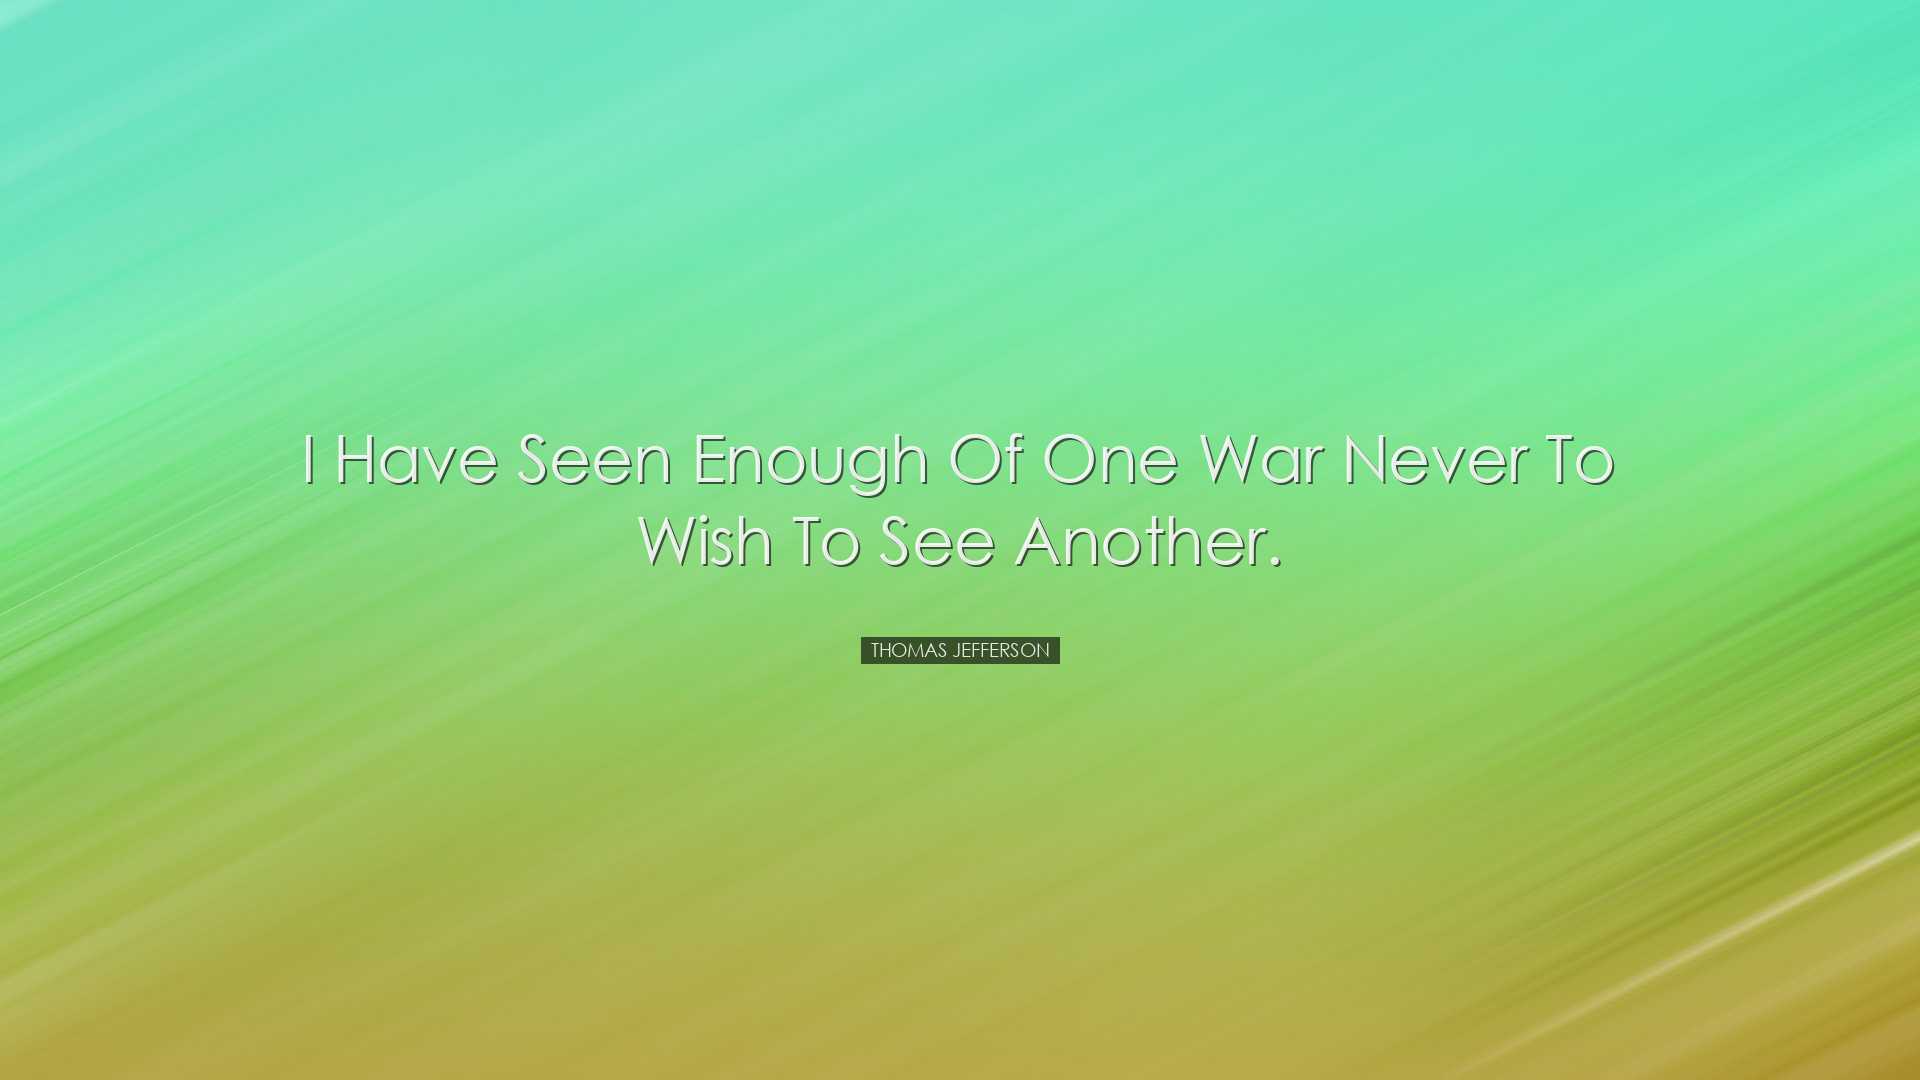 I have seen enough of one war never to wish to see another. - Thom